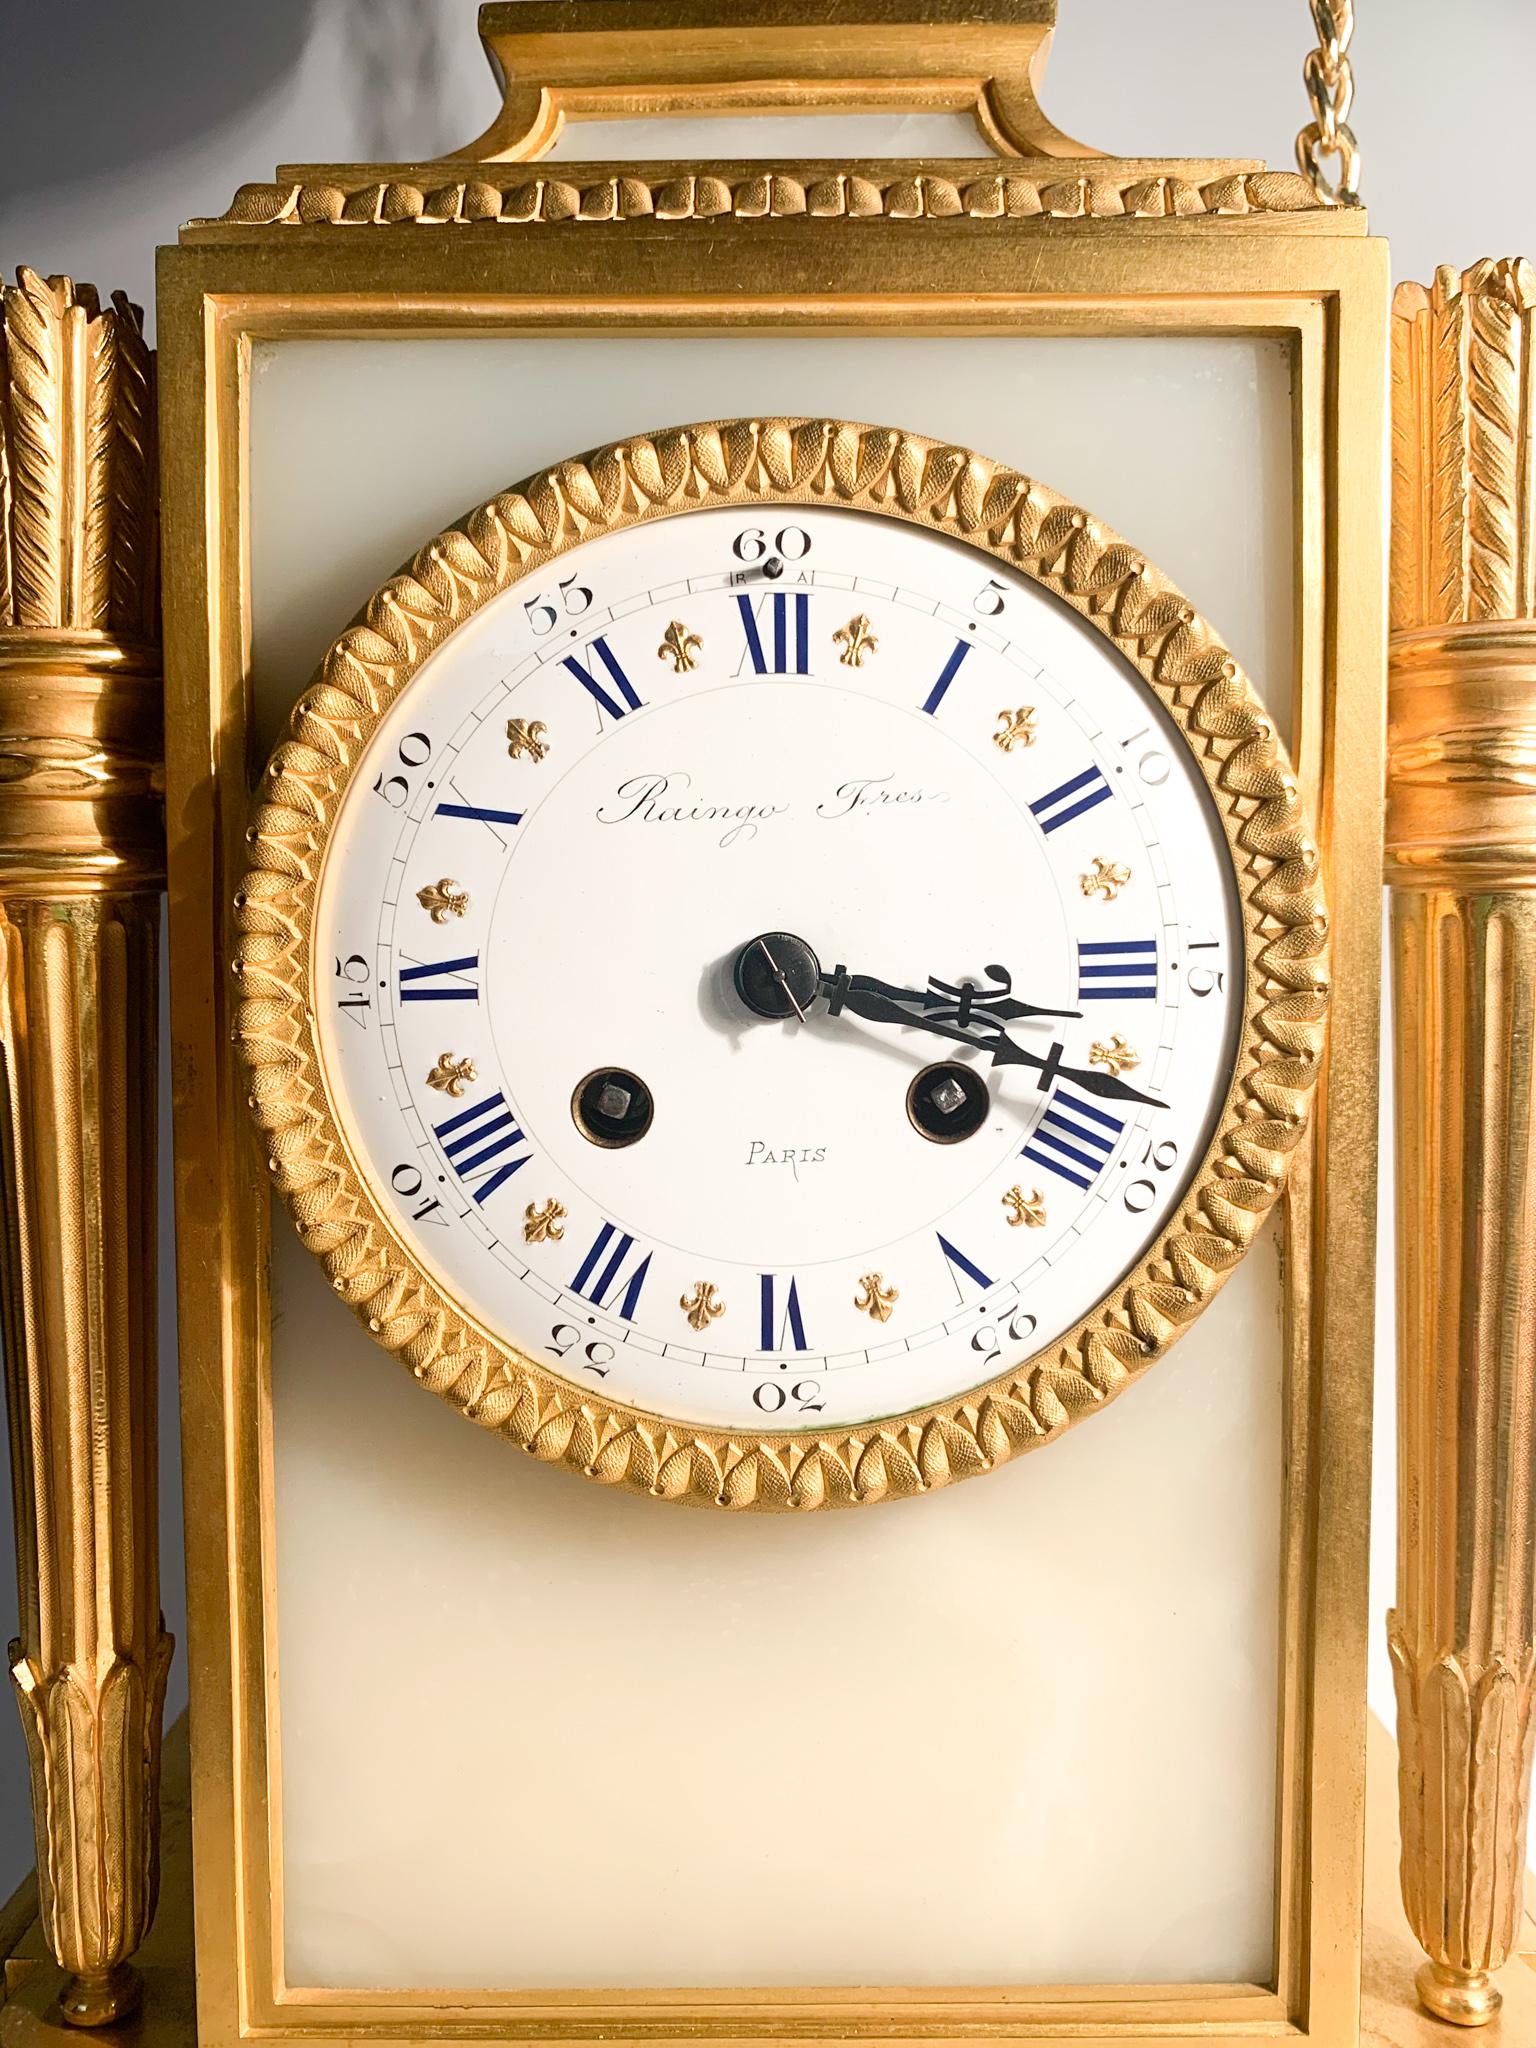 Raingo Frères Louis XVI Style Table Clock in Alabaster & Gilded Bronze, 1800 For Sale 1